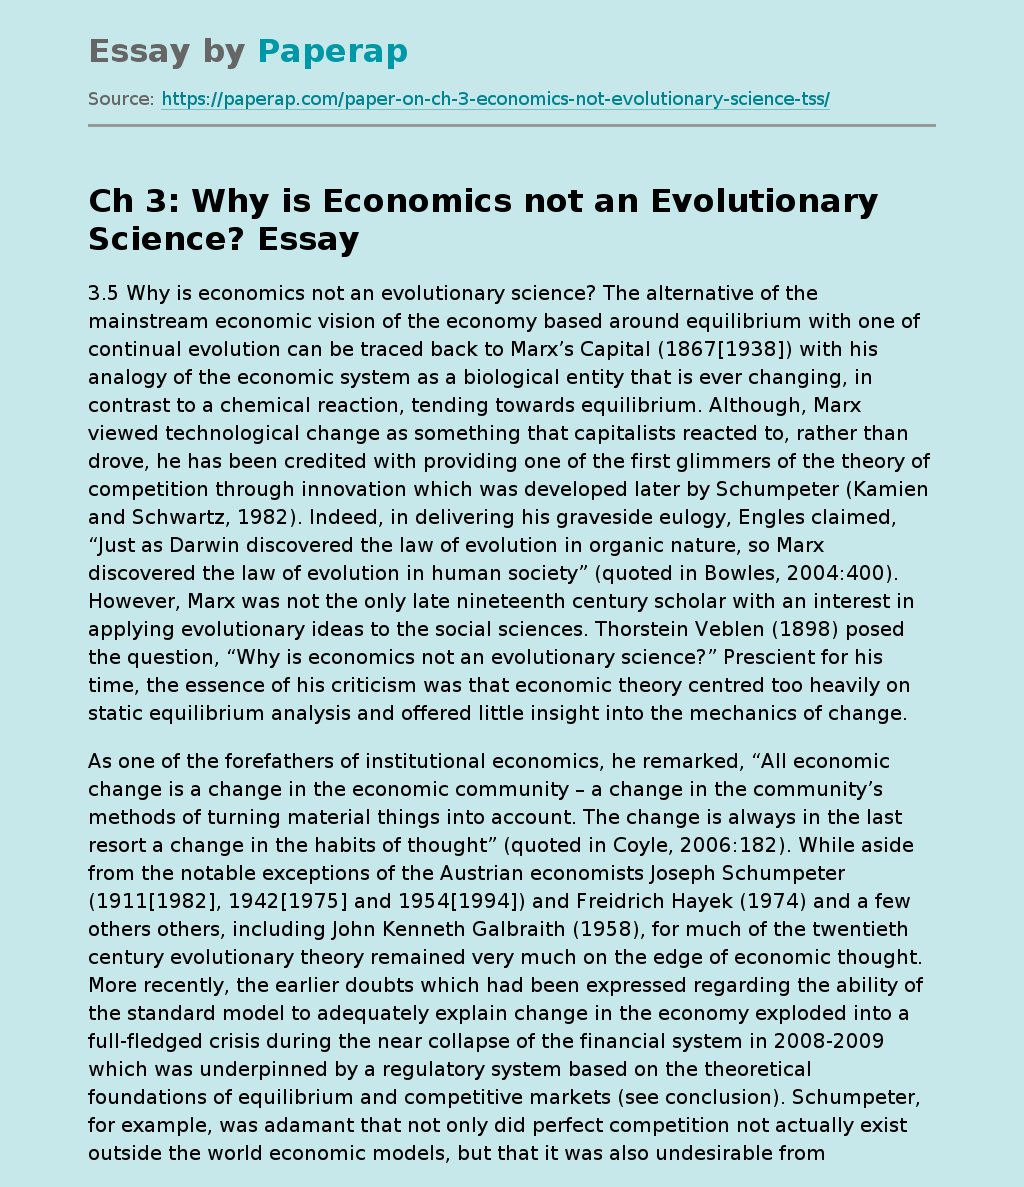 Why is Economics not an Evolutionary Science?